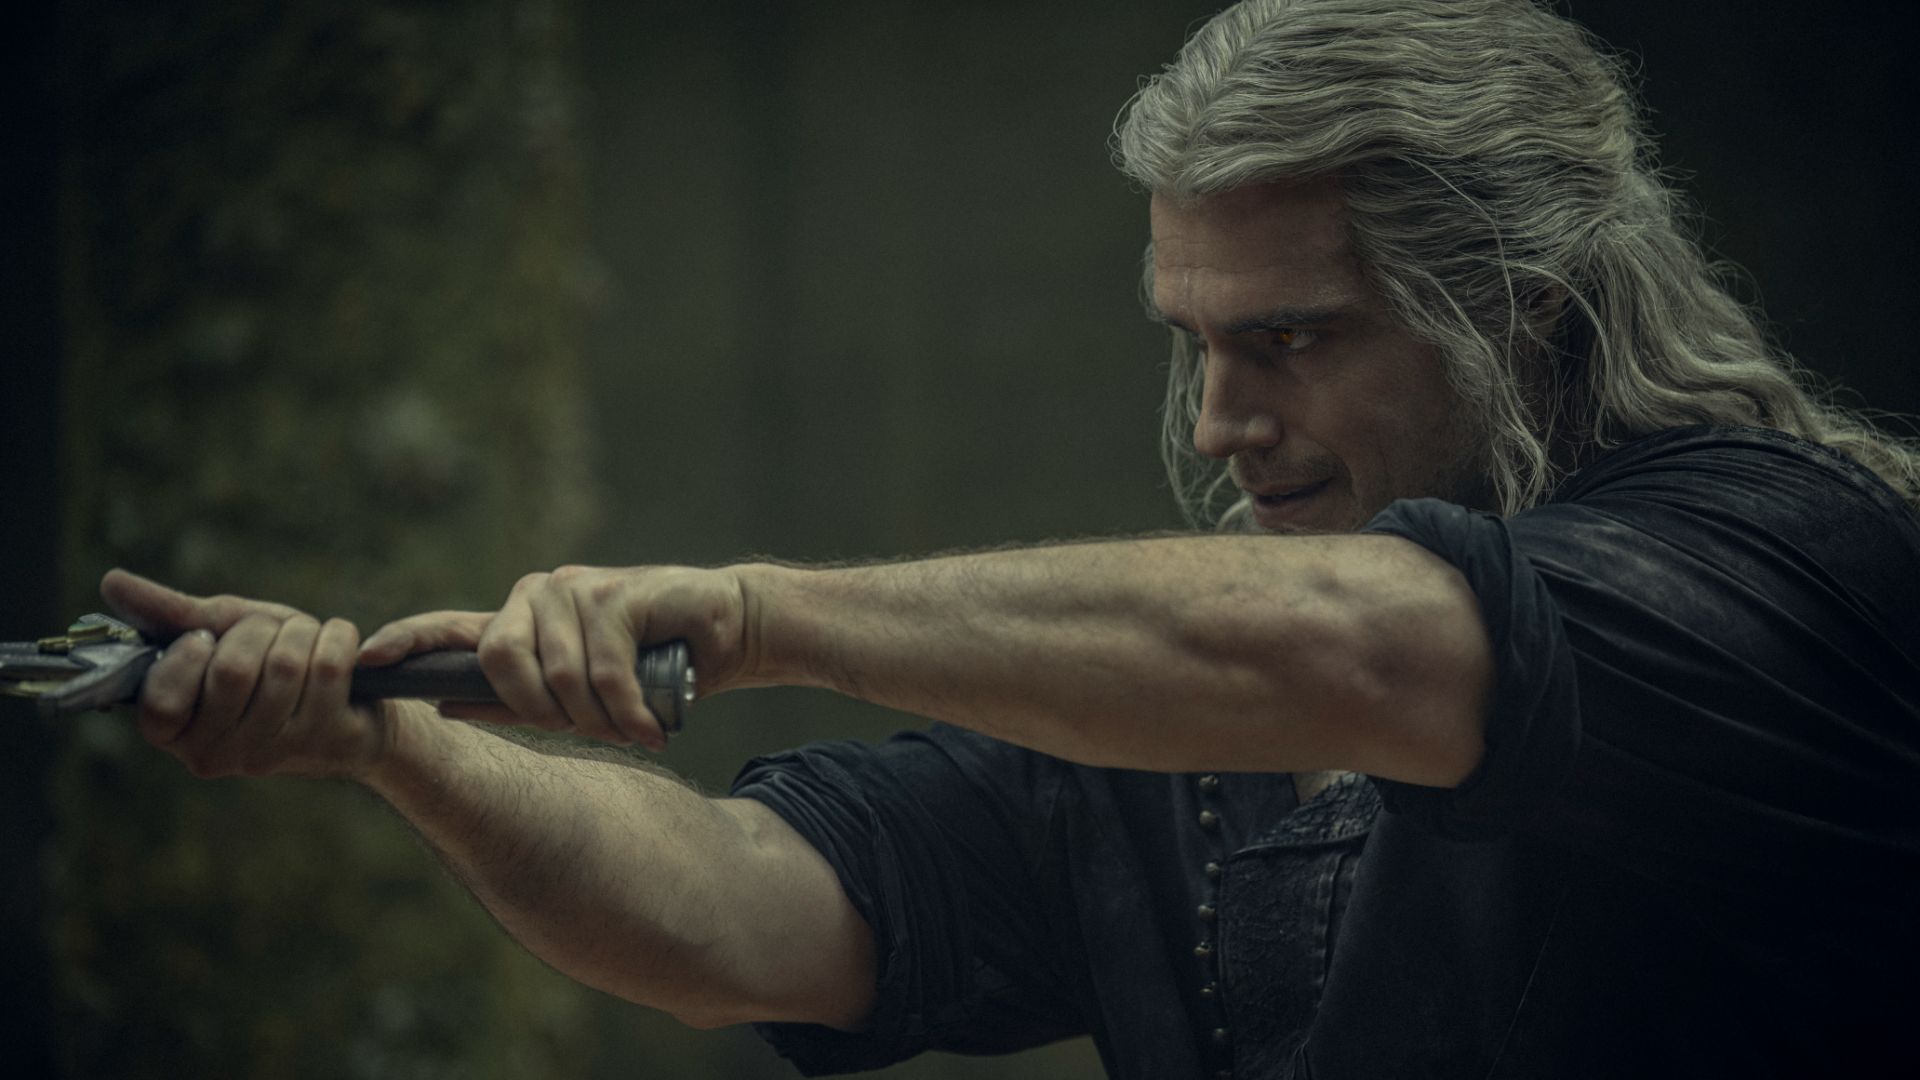 When is 'The Witcher' season 3 on Netflix?